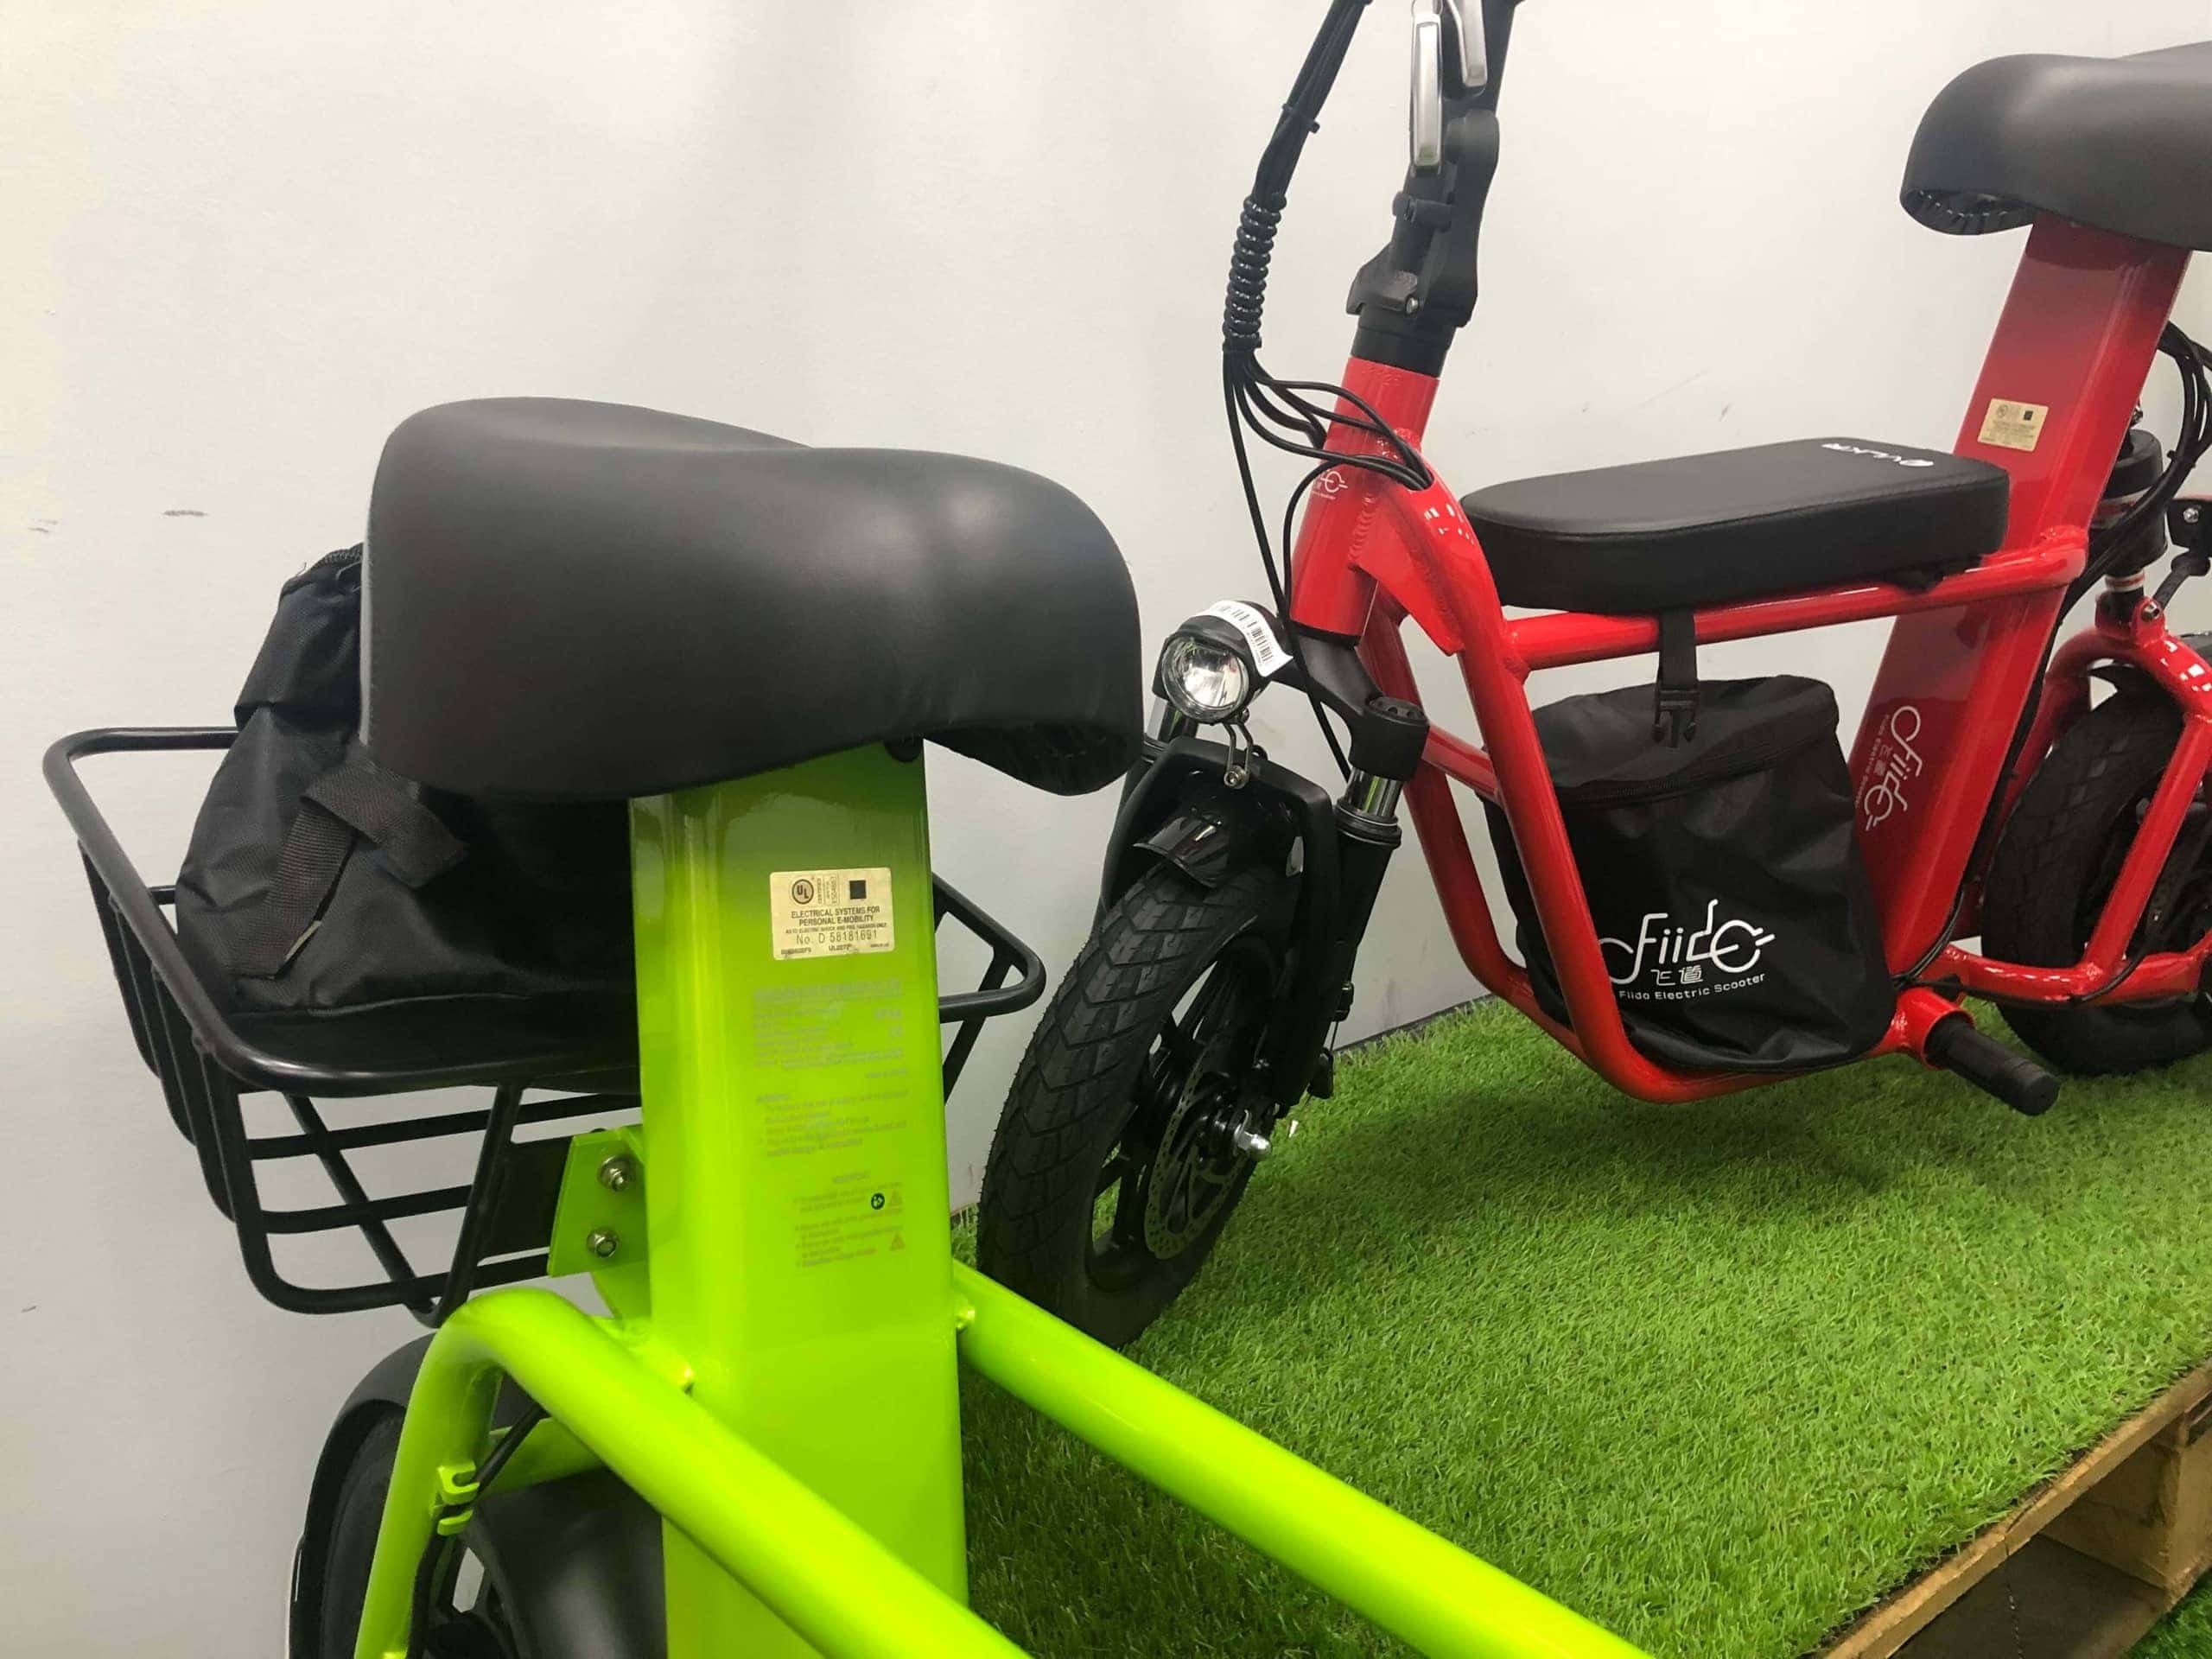 FIIDO UL2272 certified electric scooter scaled - How to dispose your PMD and electric scooter (e-scooter)